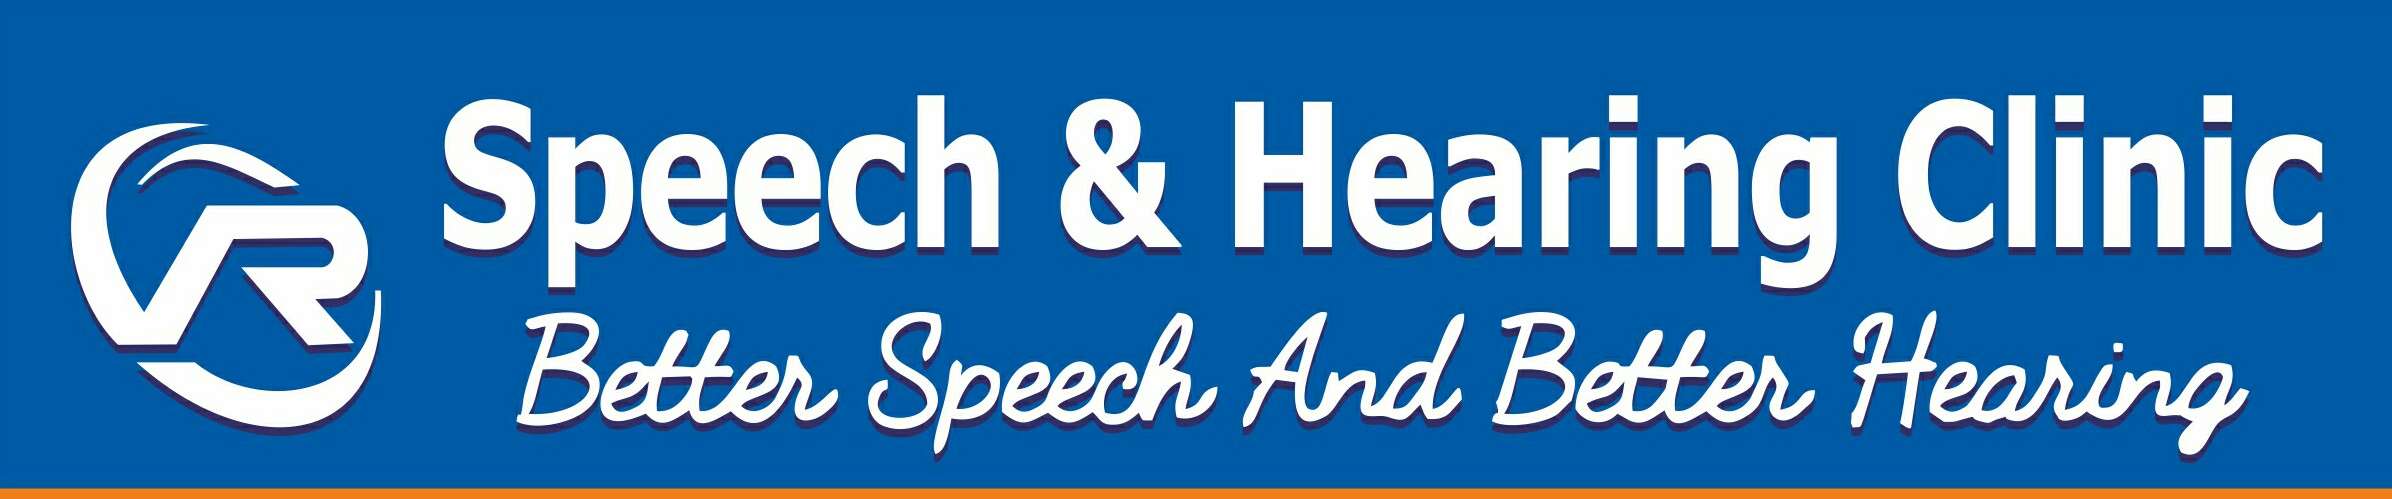 Vr Speech And Hearing Clinic 